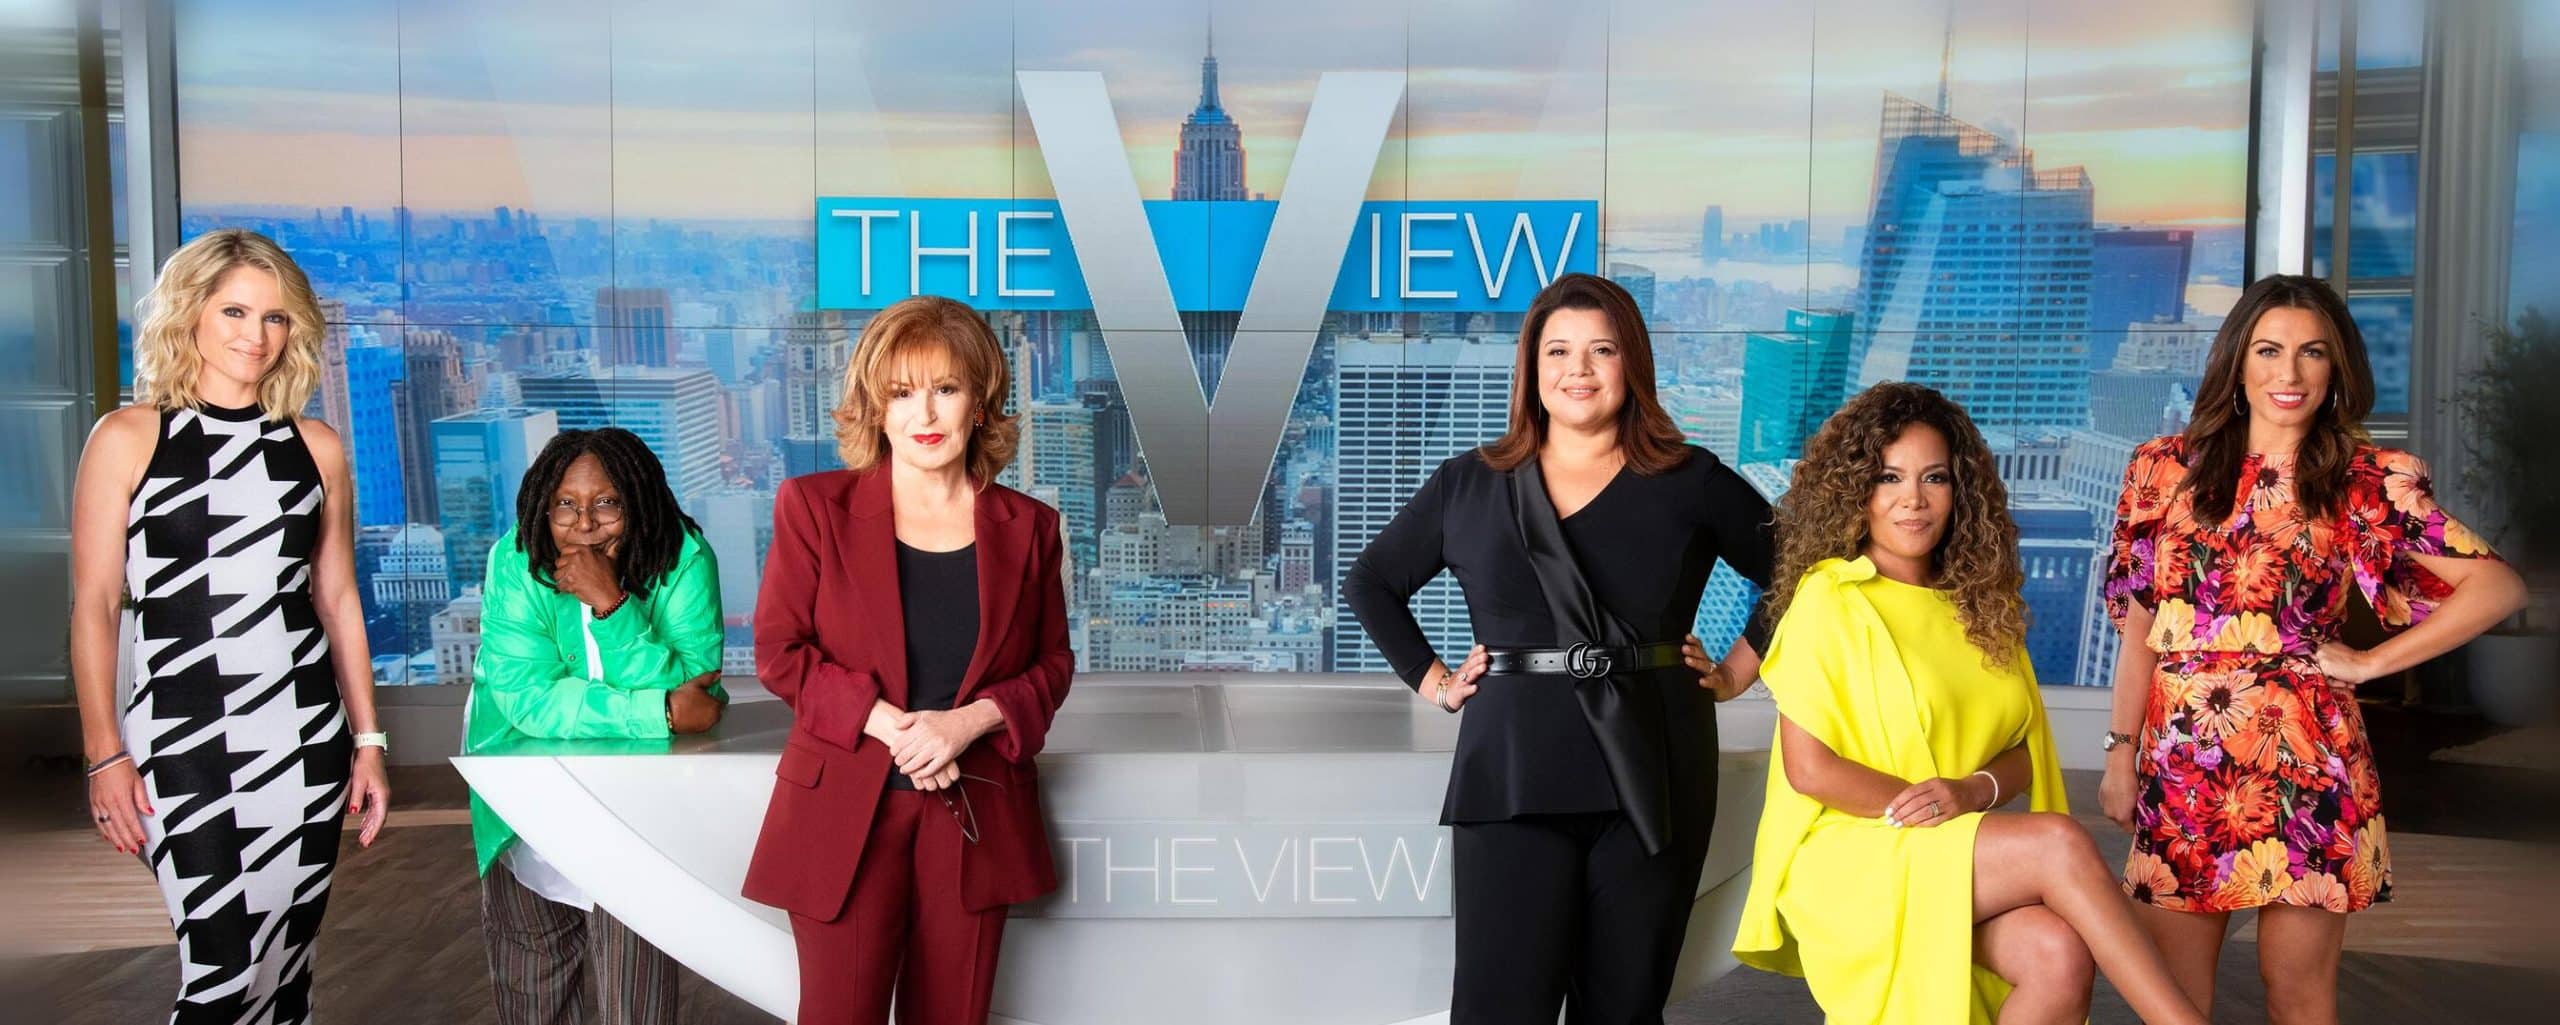 the view cast